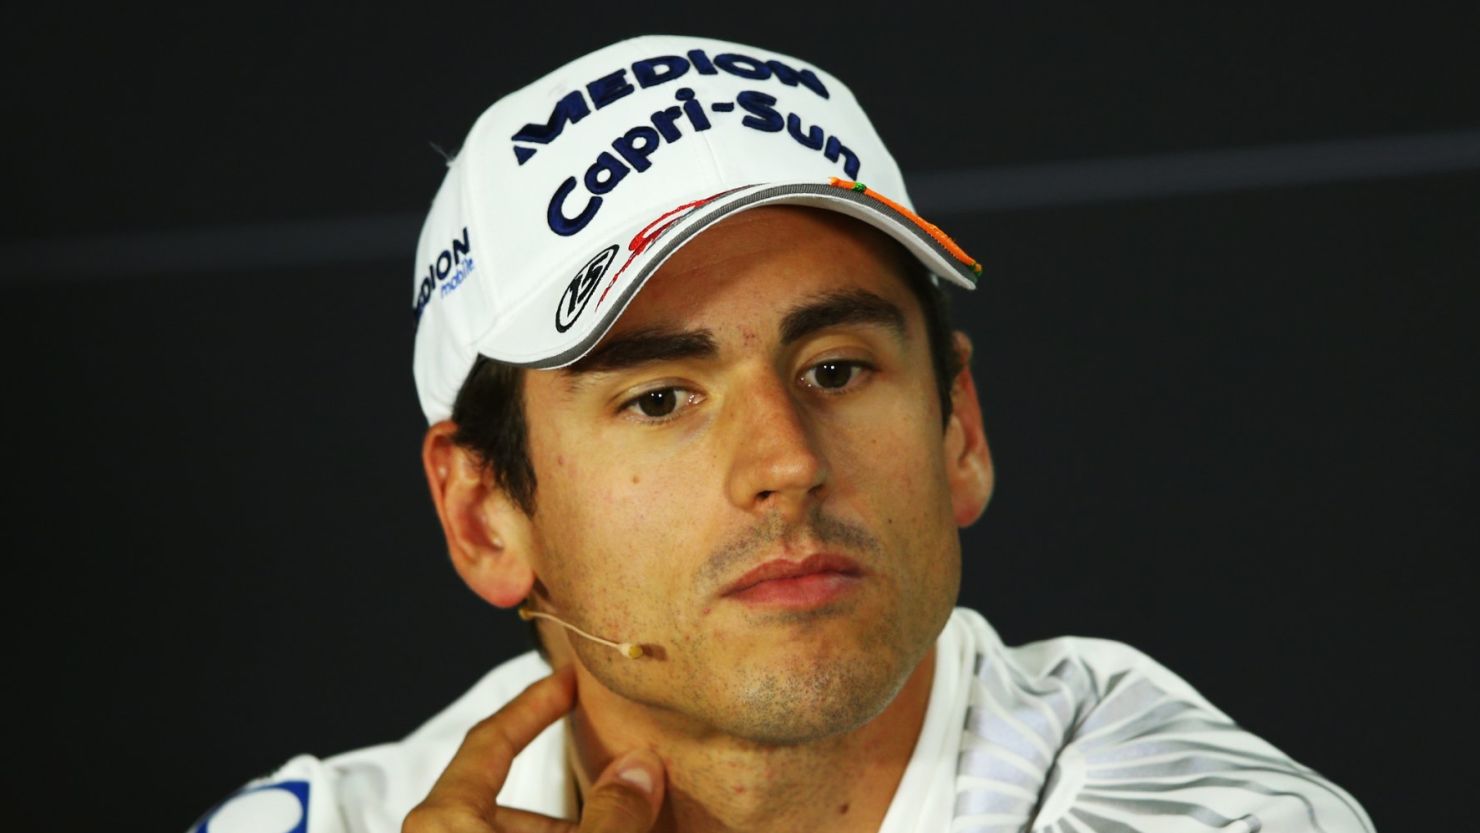 Germany's Adrian Sutil will join forces with Sauber for 2014 after six seasons with the Force India set up.